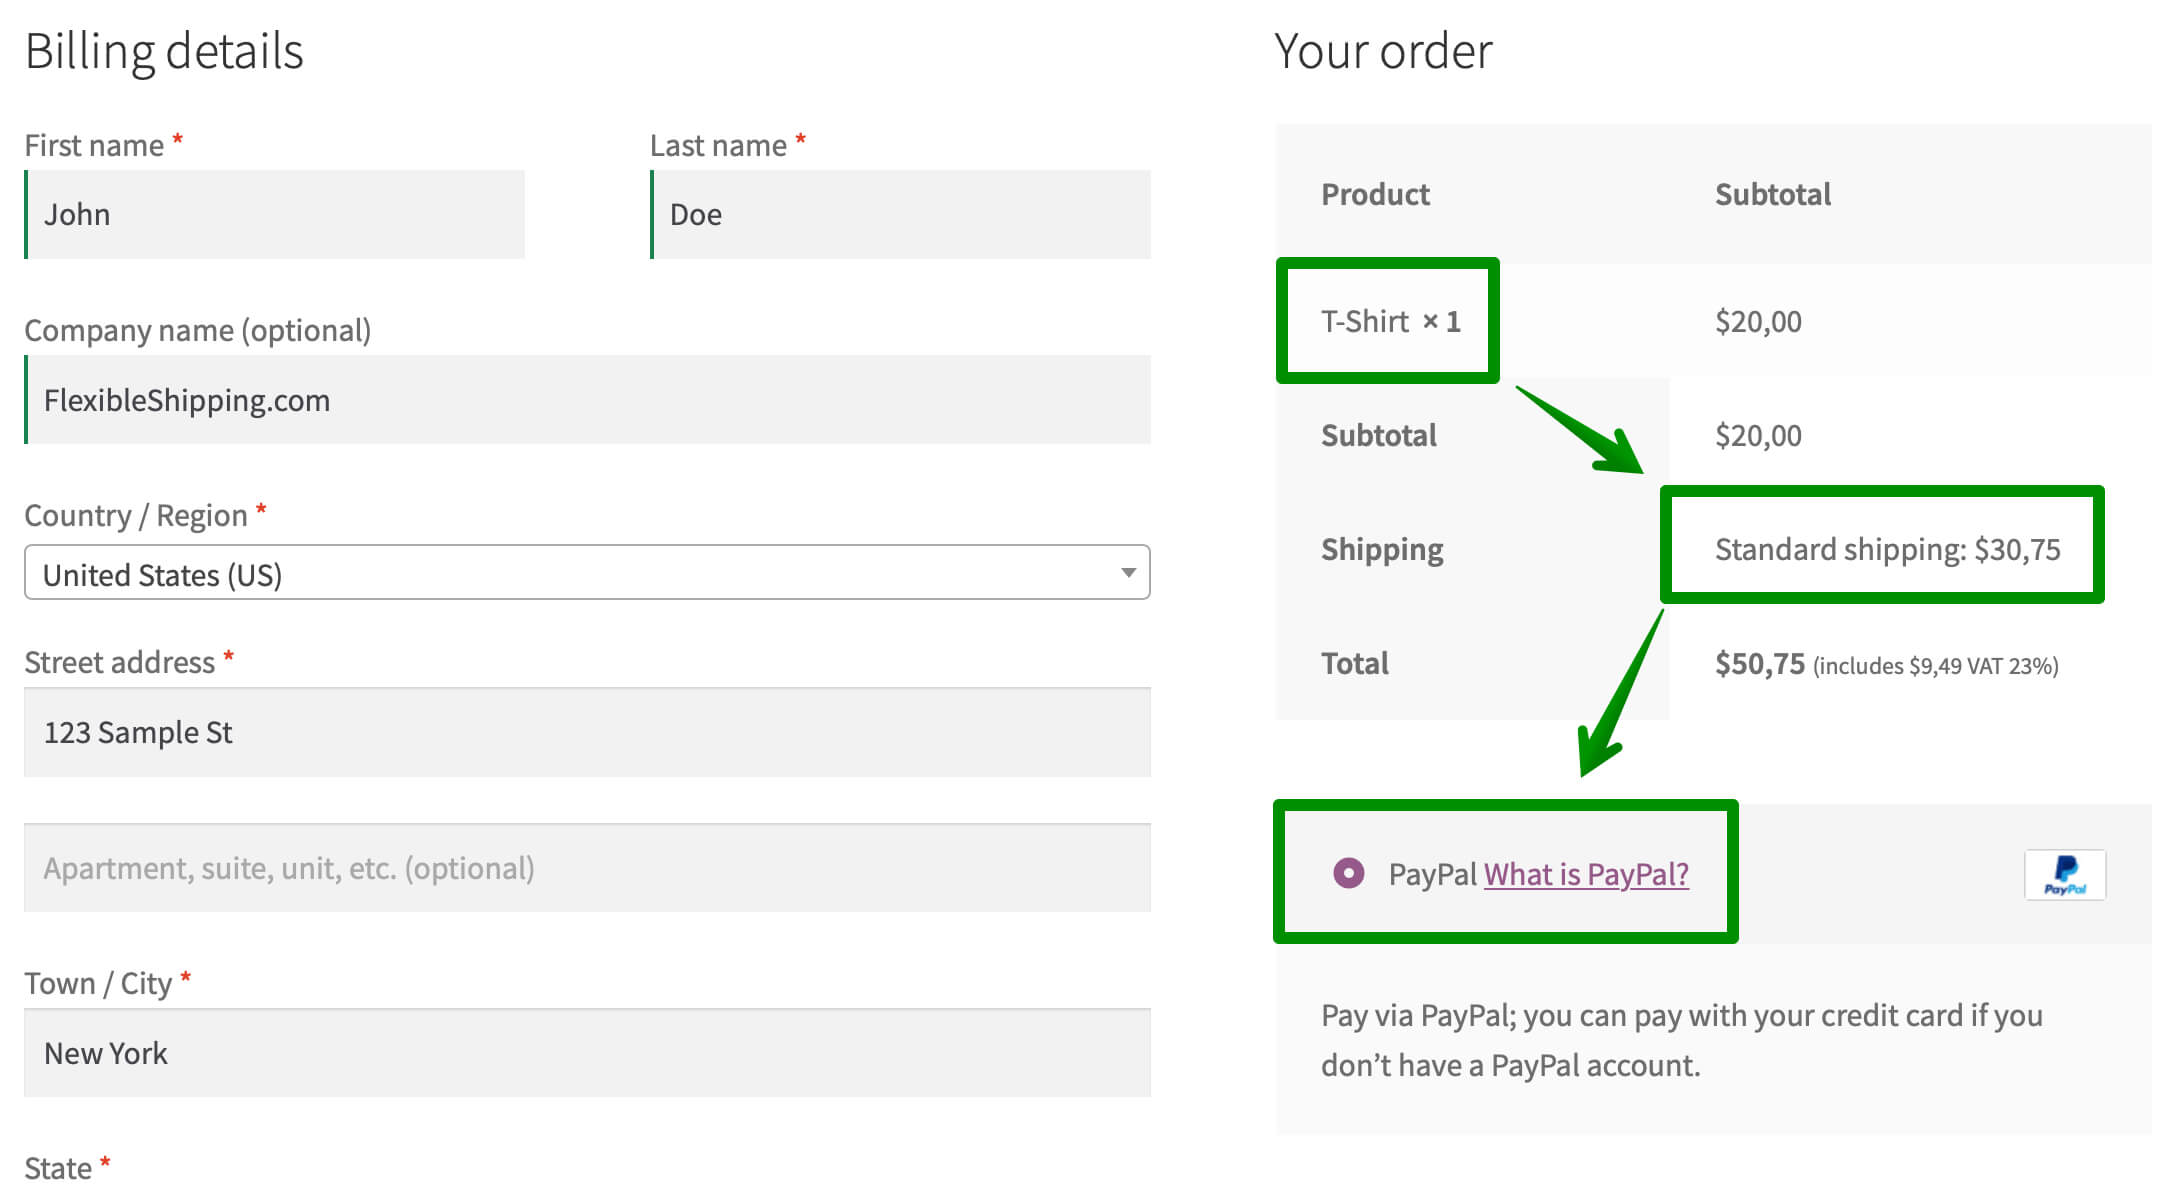 Standard shipping with only PayPal enabled